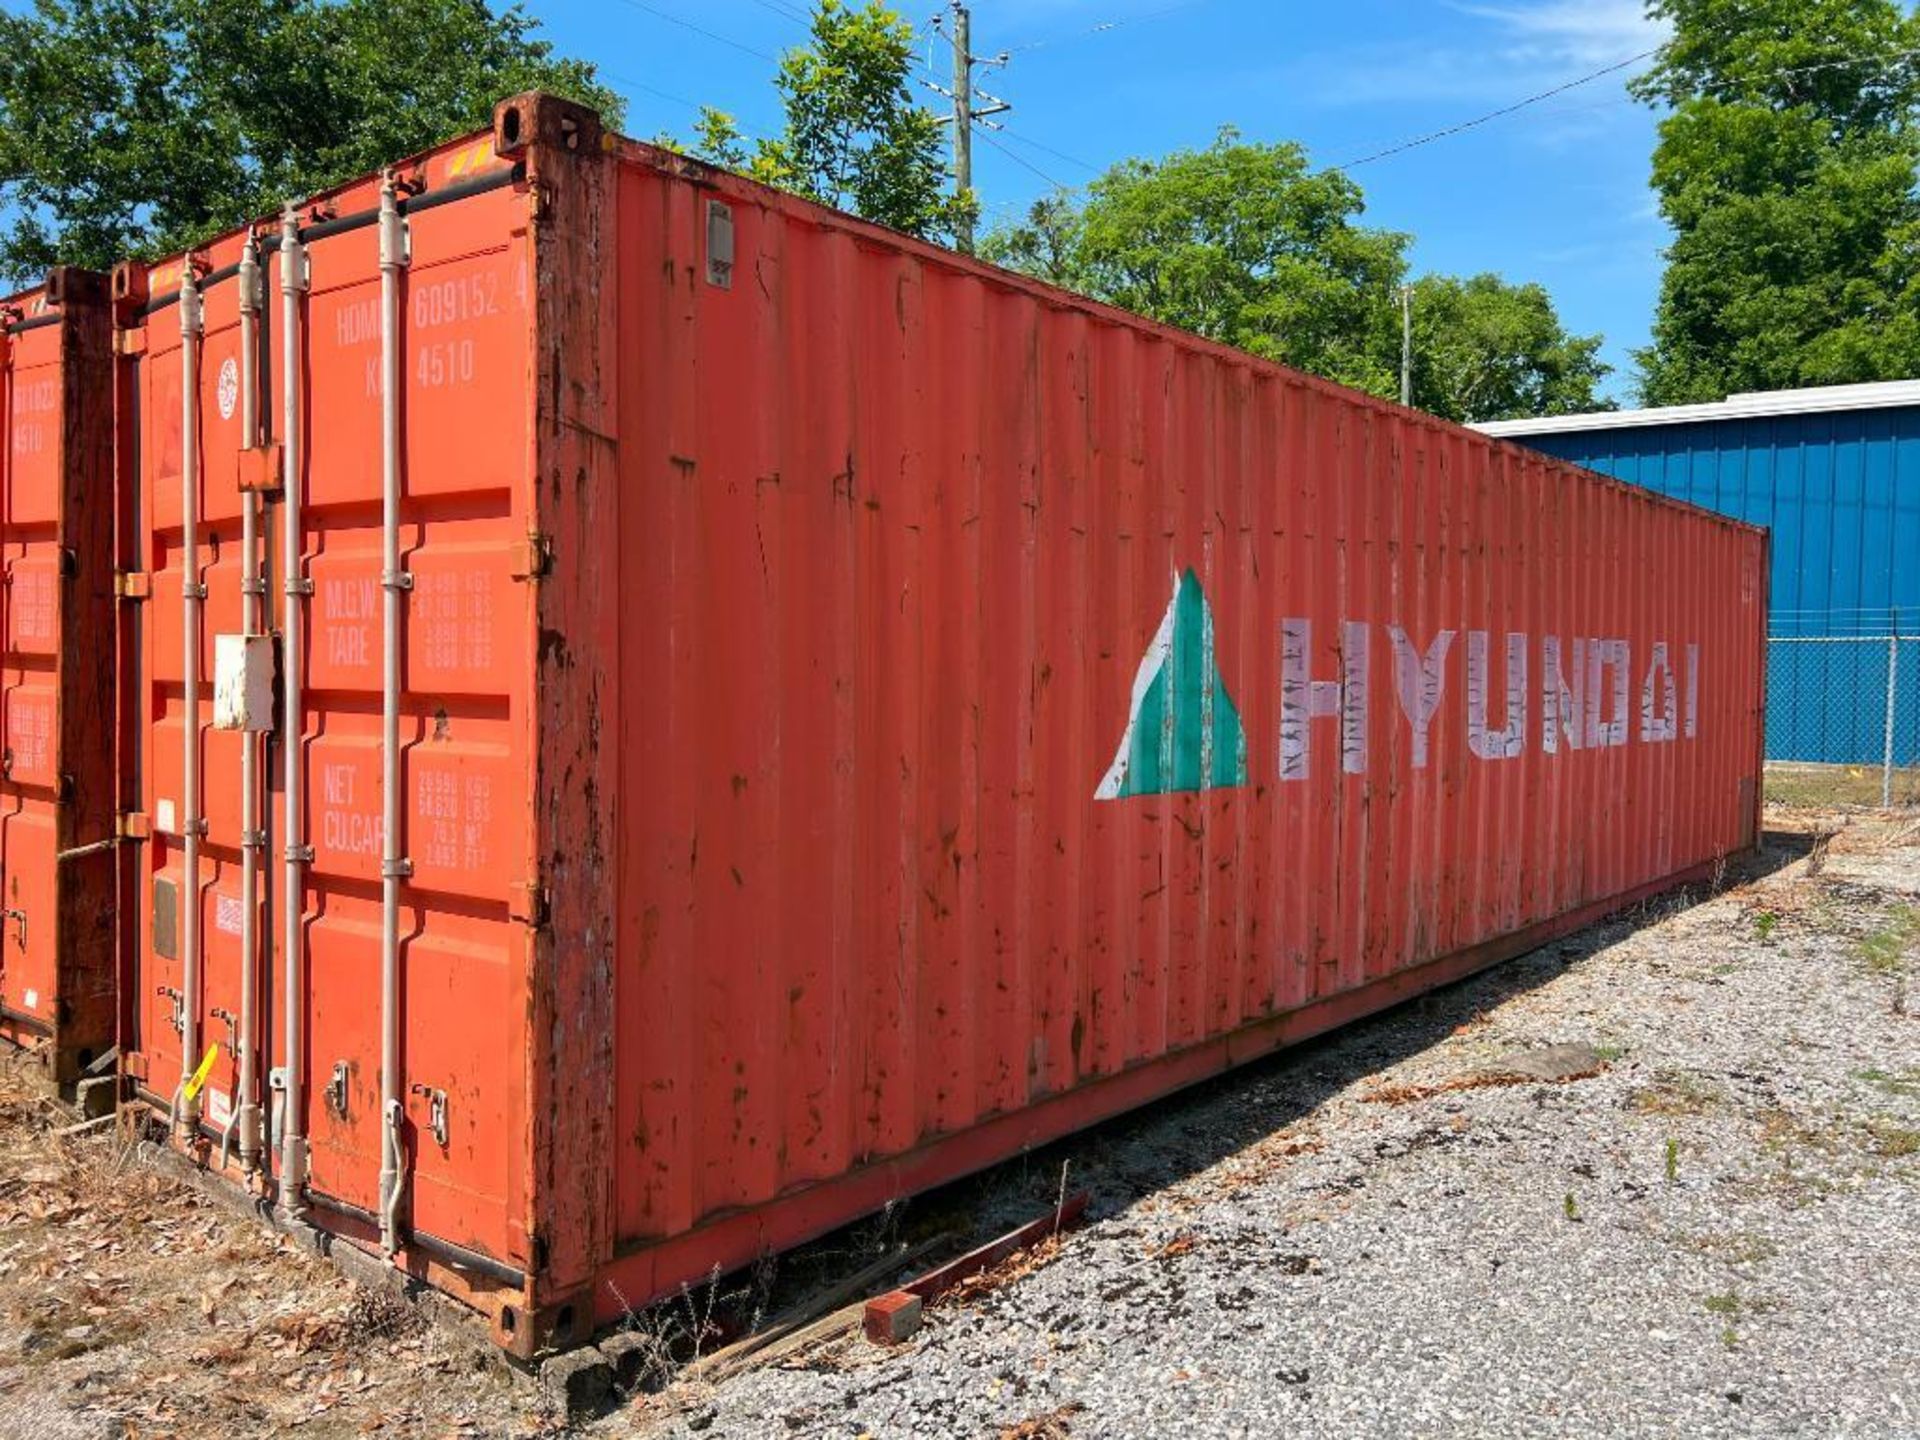 Hyundai 67,200 LB Capacity Shipping Container, Dimensions = 40' x 10' - Image 2 of 2